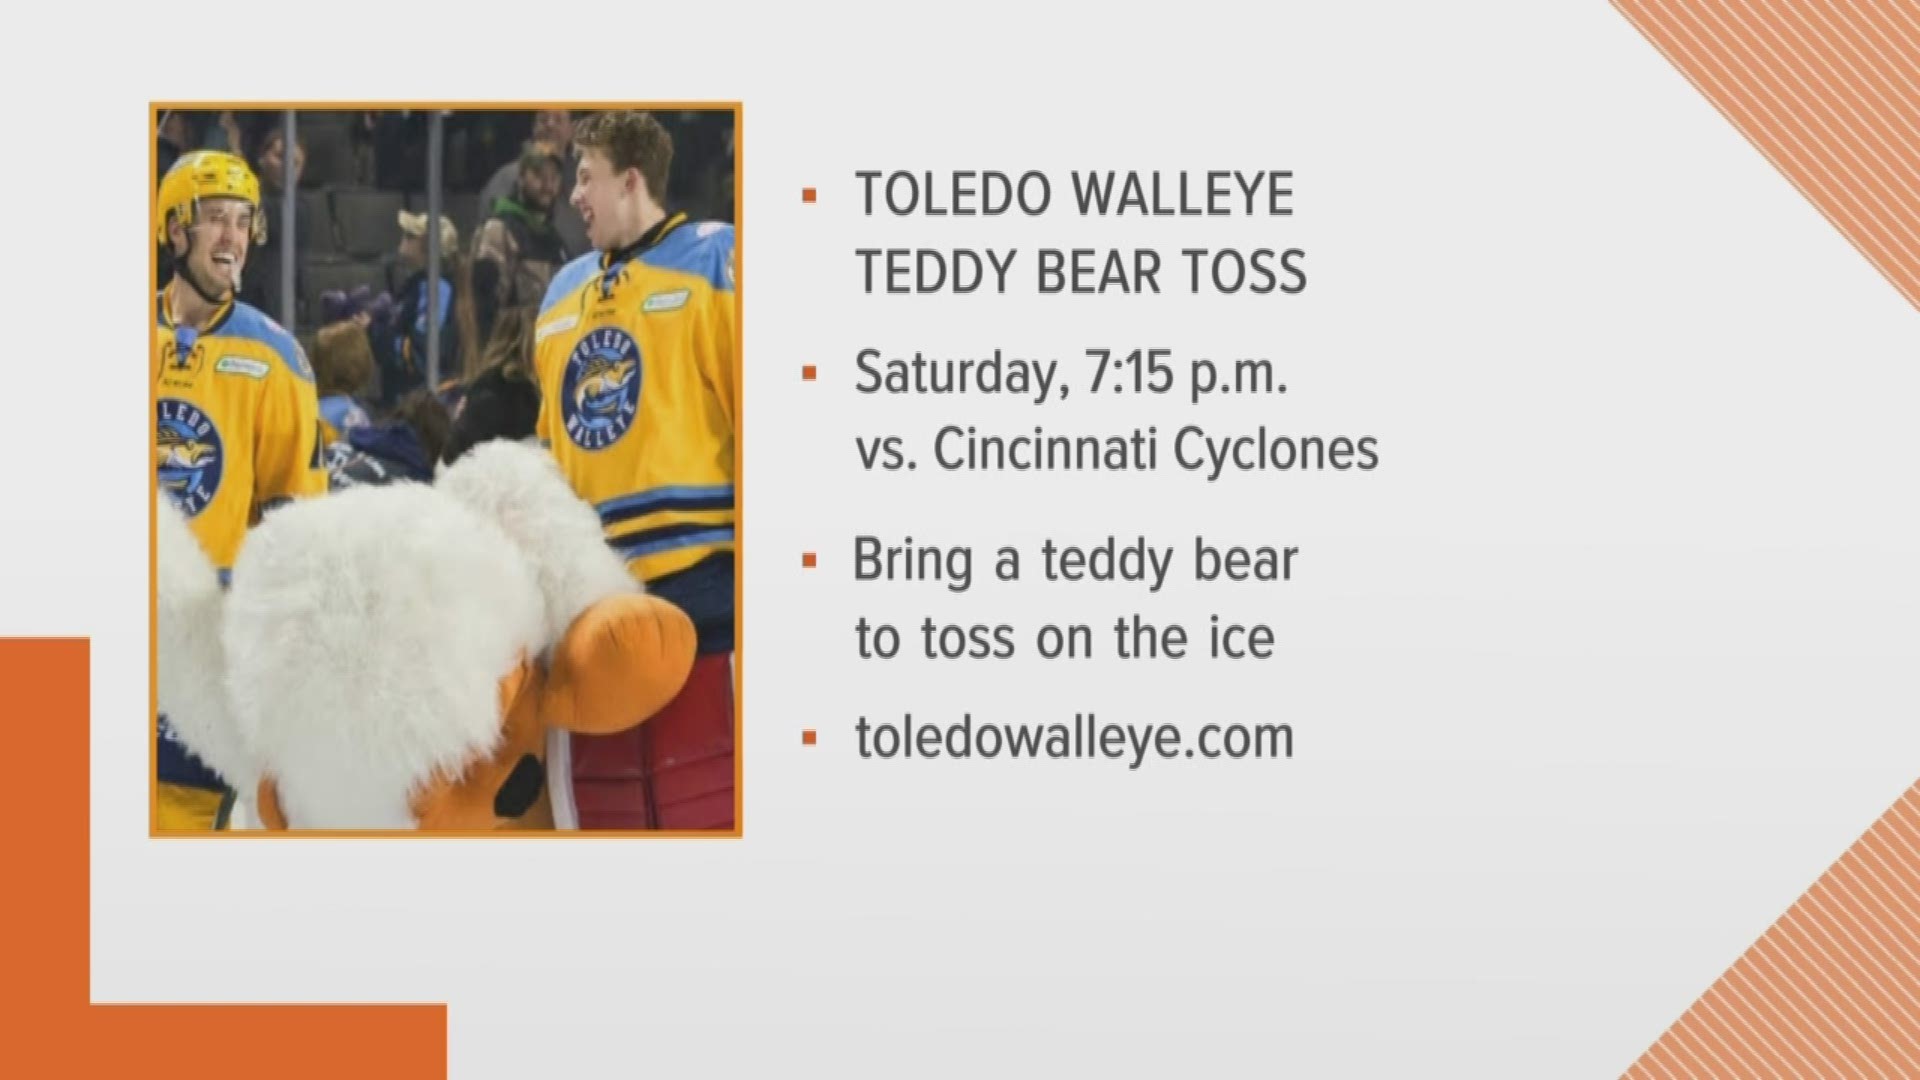 There are so many events coming up this weekend to celebrate both hockey and the holidays. Rob Wiercinski explains how you can get involved.